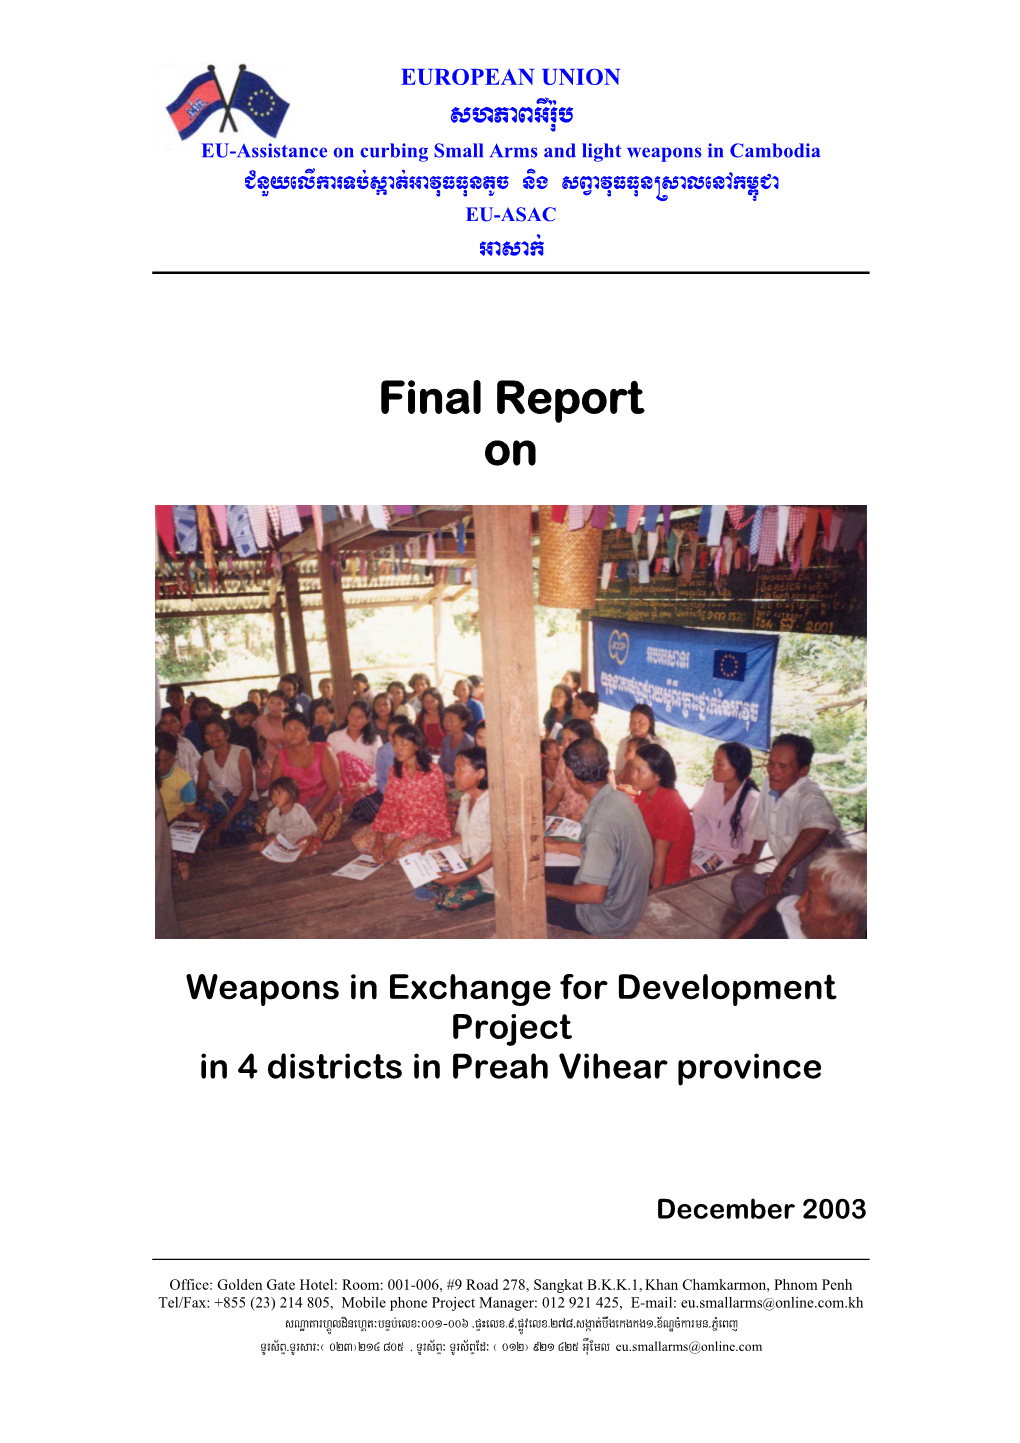 Final Report on Wfd Project in Preah Vihear Province, December 2003